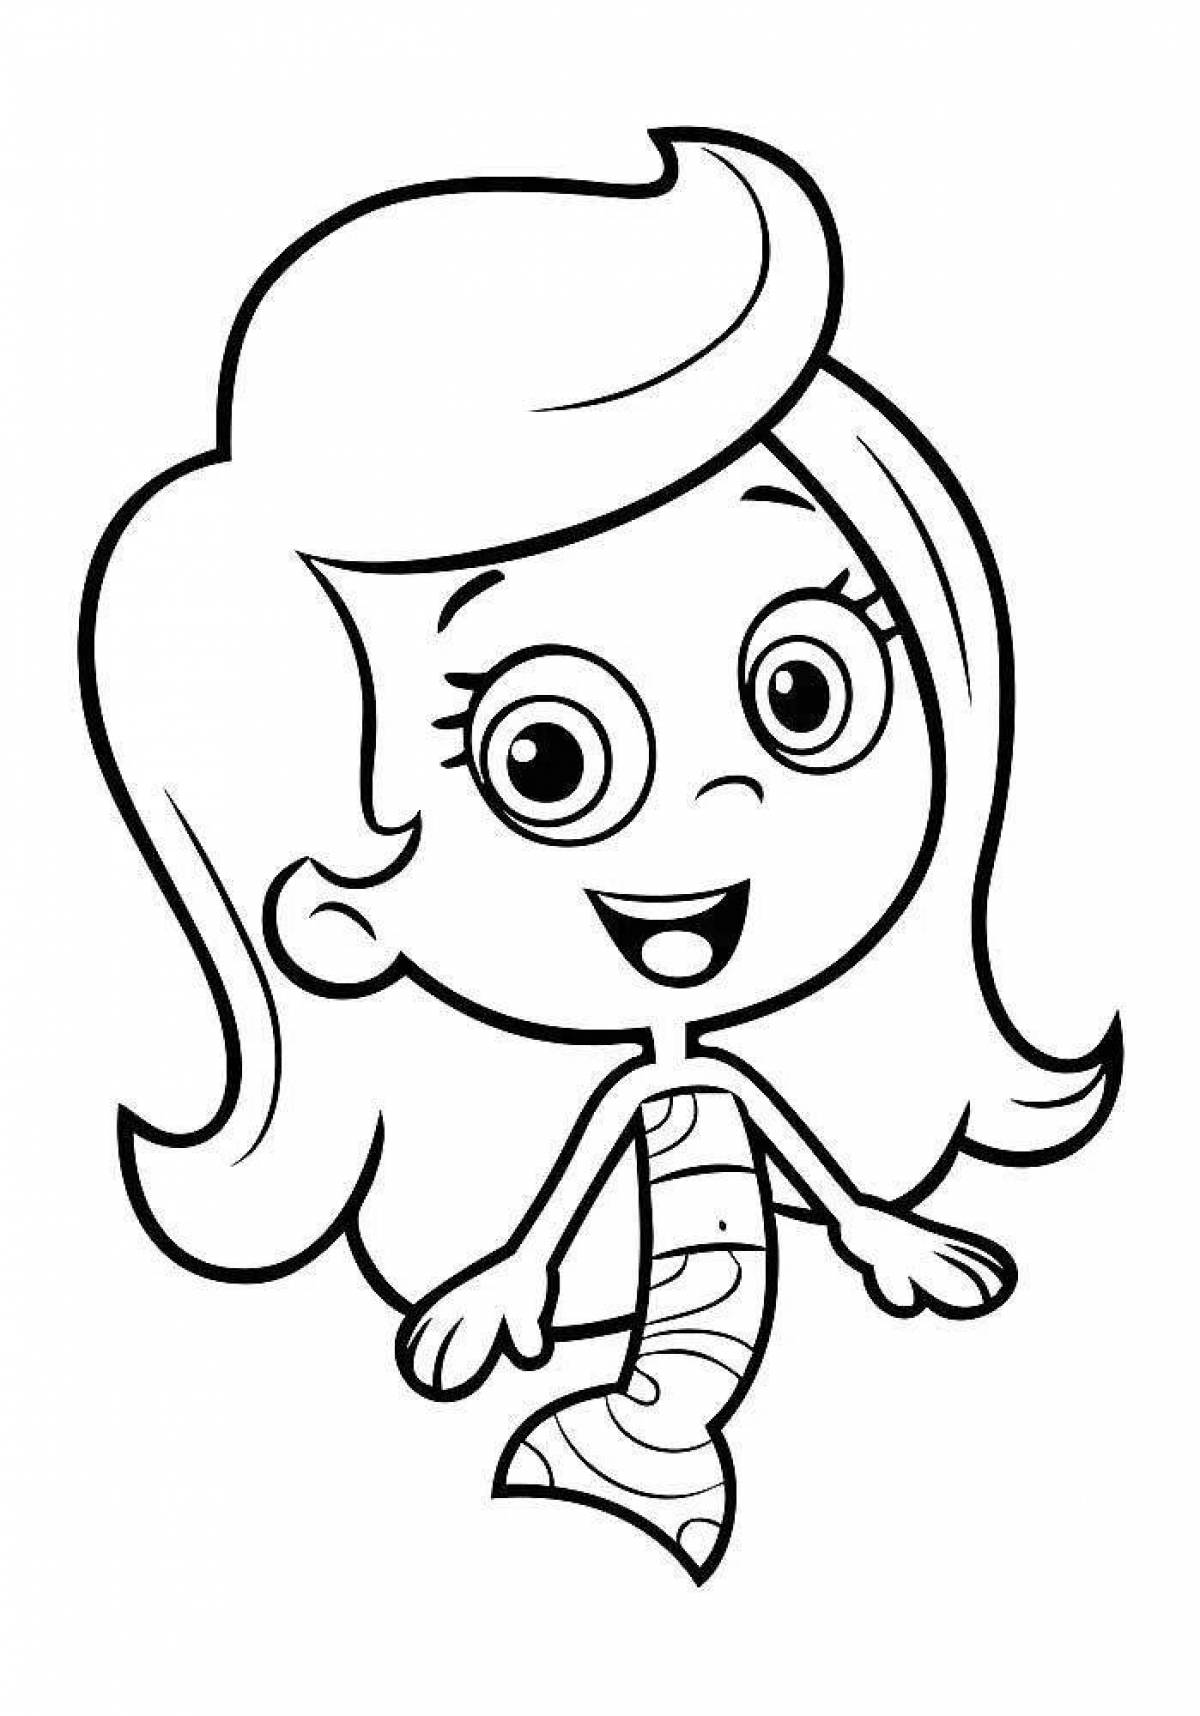 Glittering bubbles coloring page